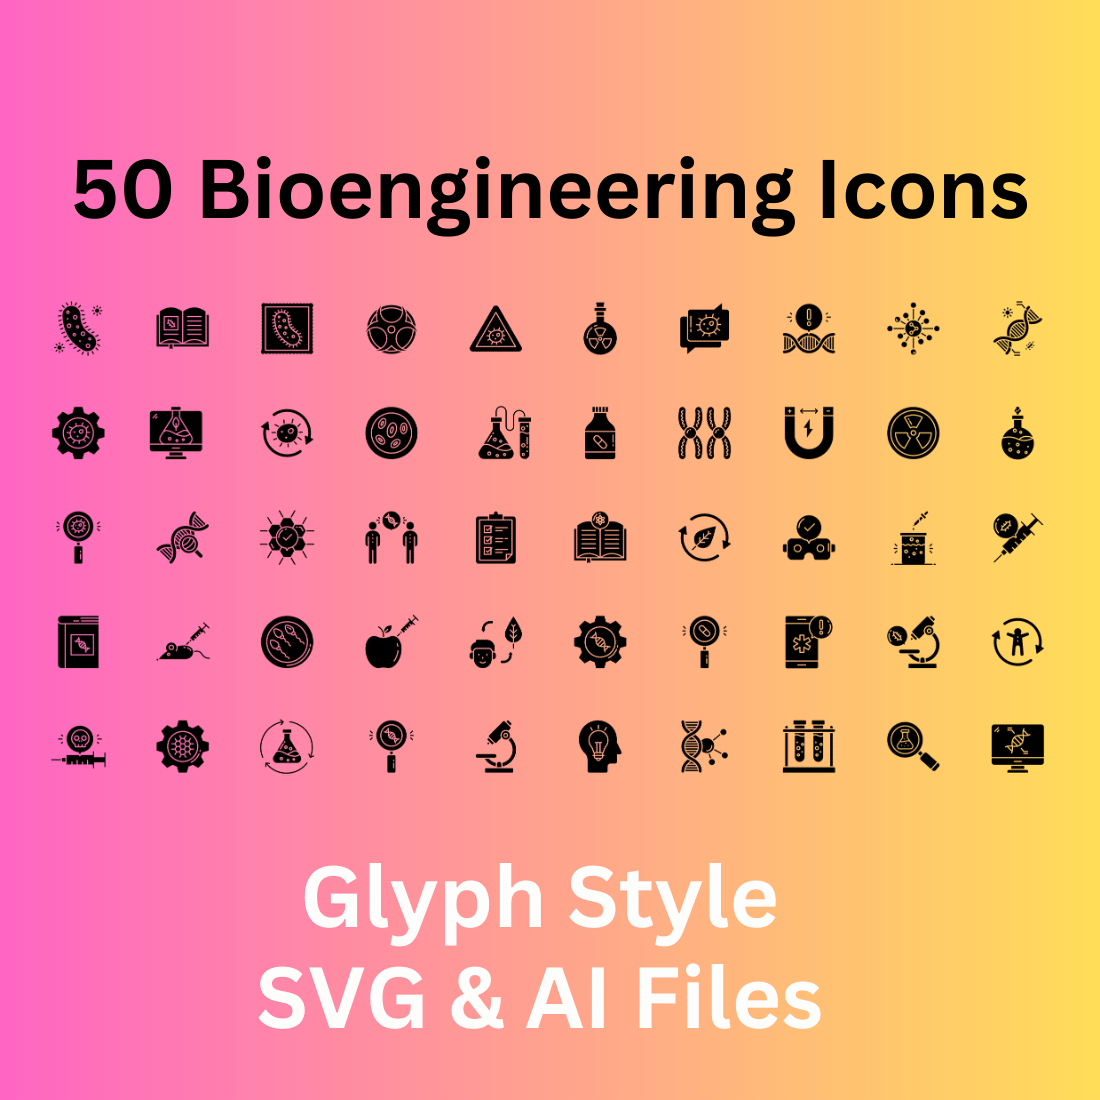 Bioengineering Icon Set 50 Glyph Icons - SVG And AI Files cover image.